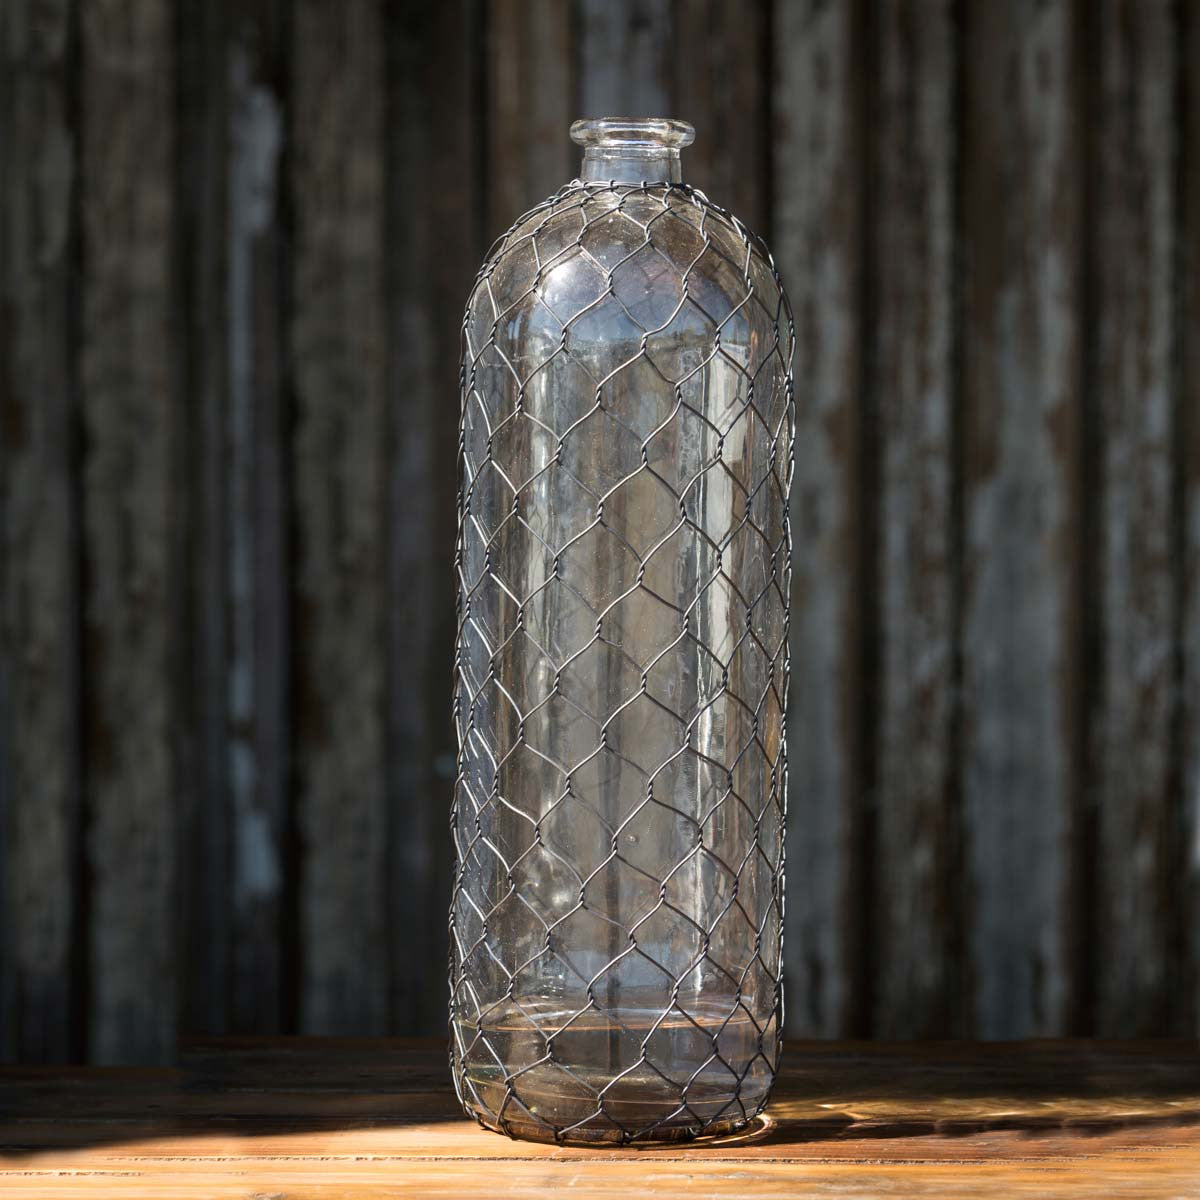 Bottle with Poultry Wire